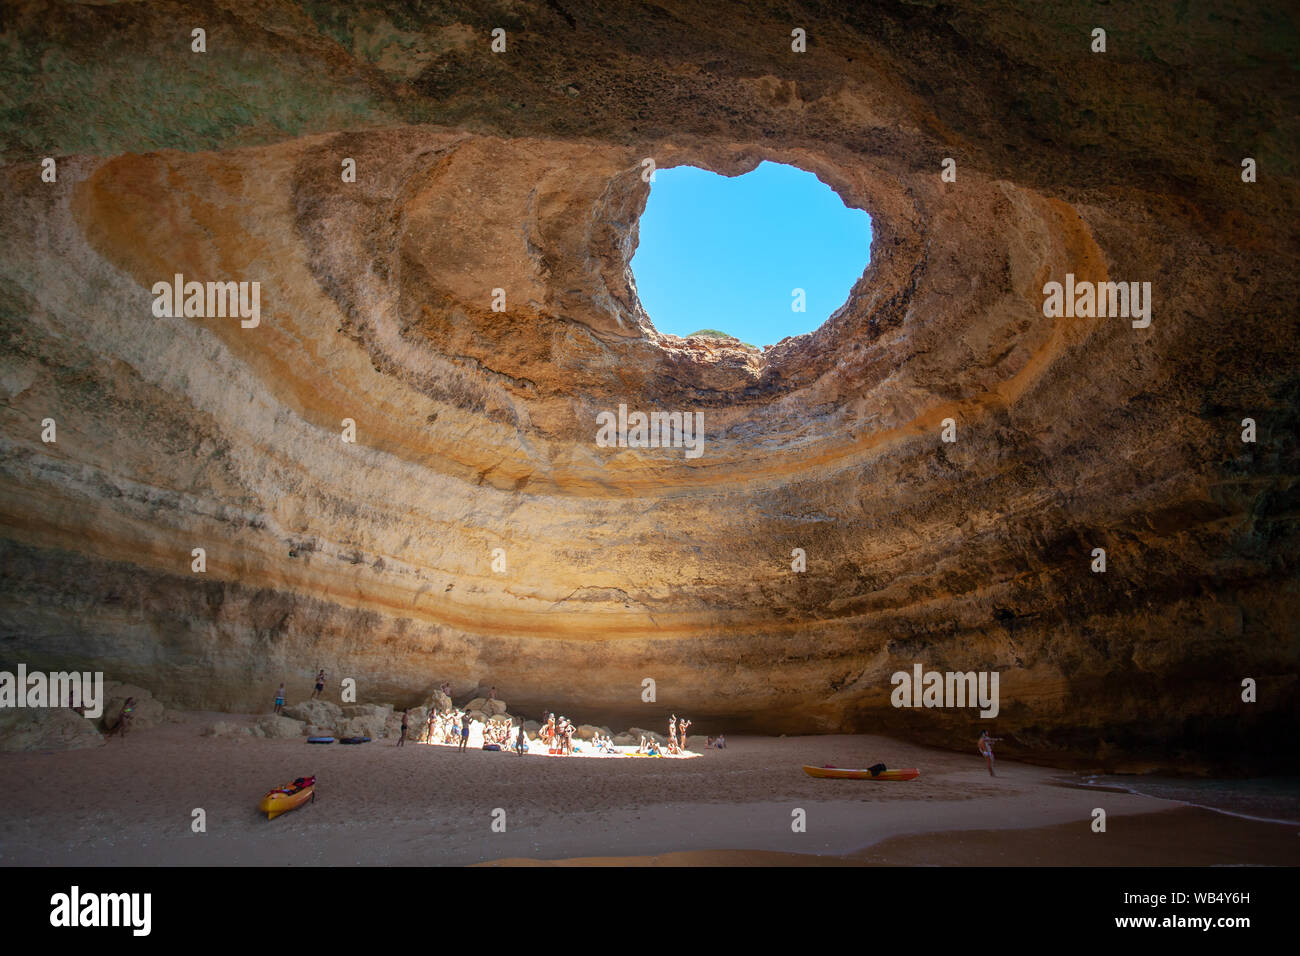 The breathtaking and iconic Benagil Cave, also known as the “Algar de Benagil”, in the district of Lagoa, in the Algarve, southern Portugal Stock Photo